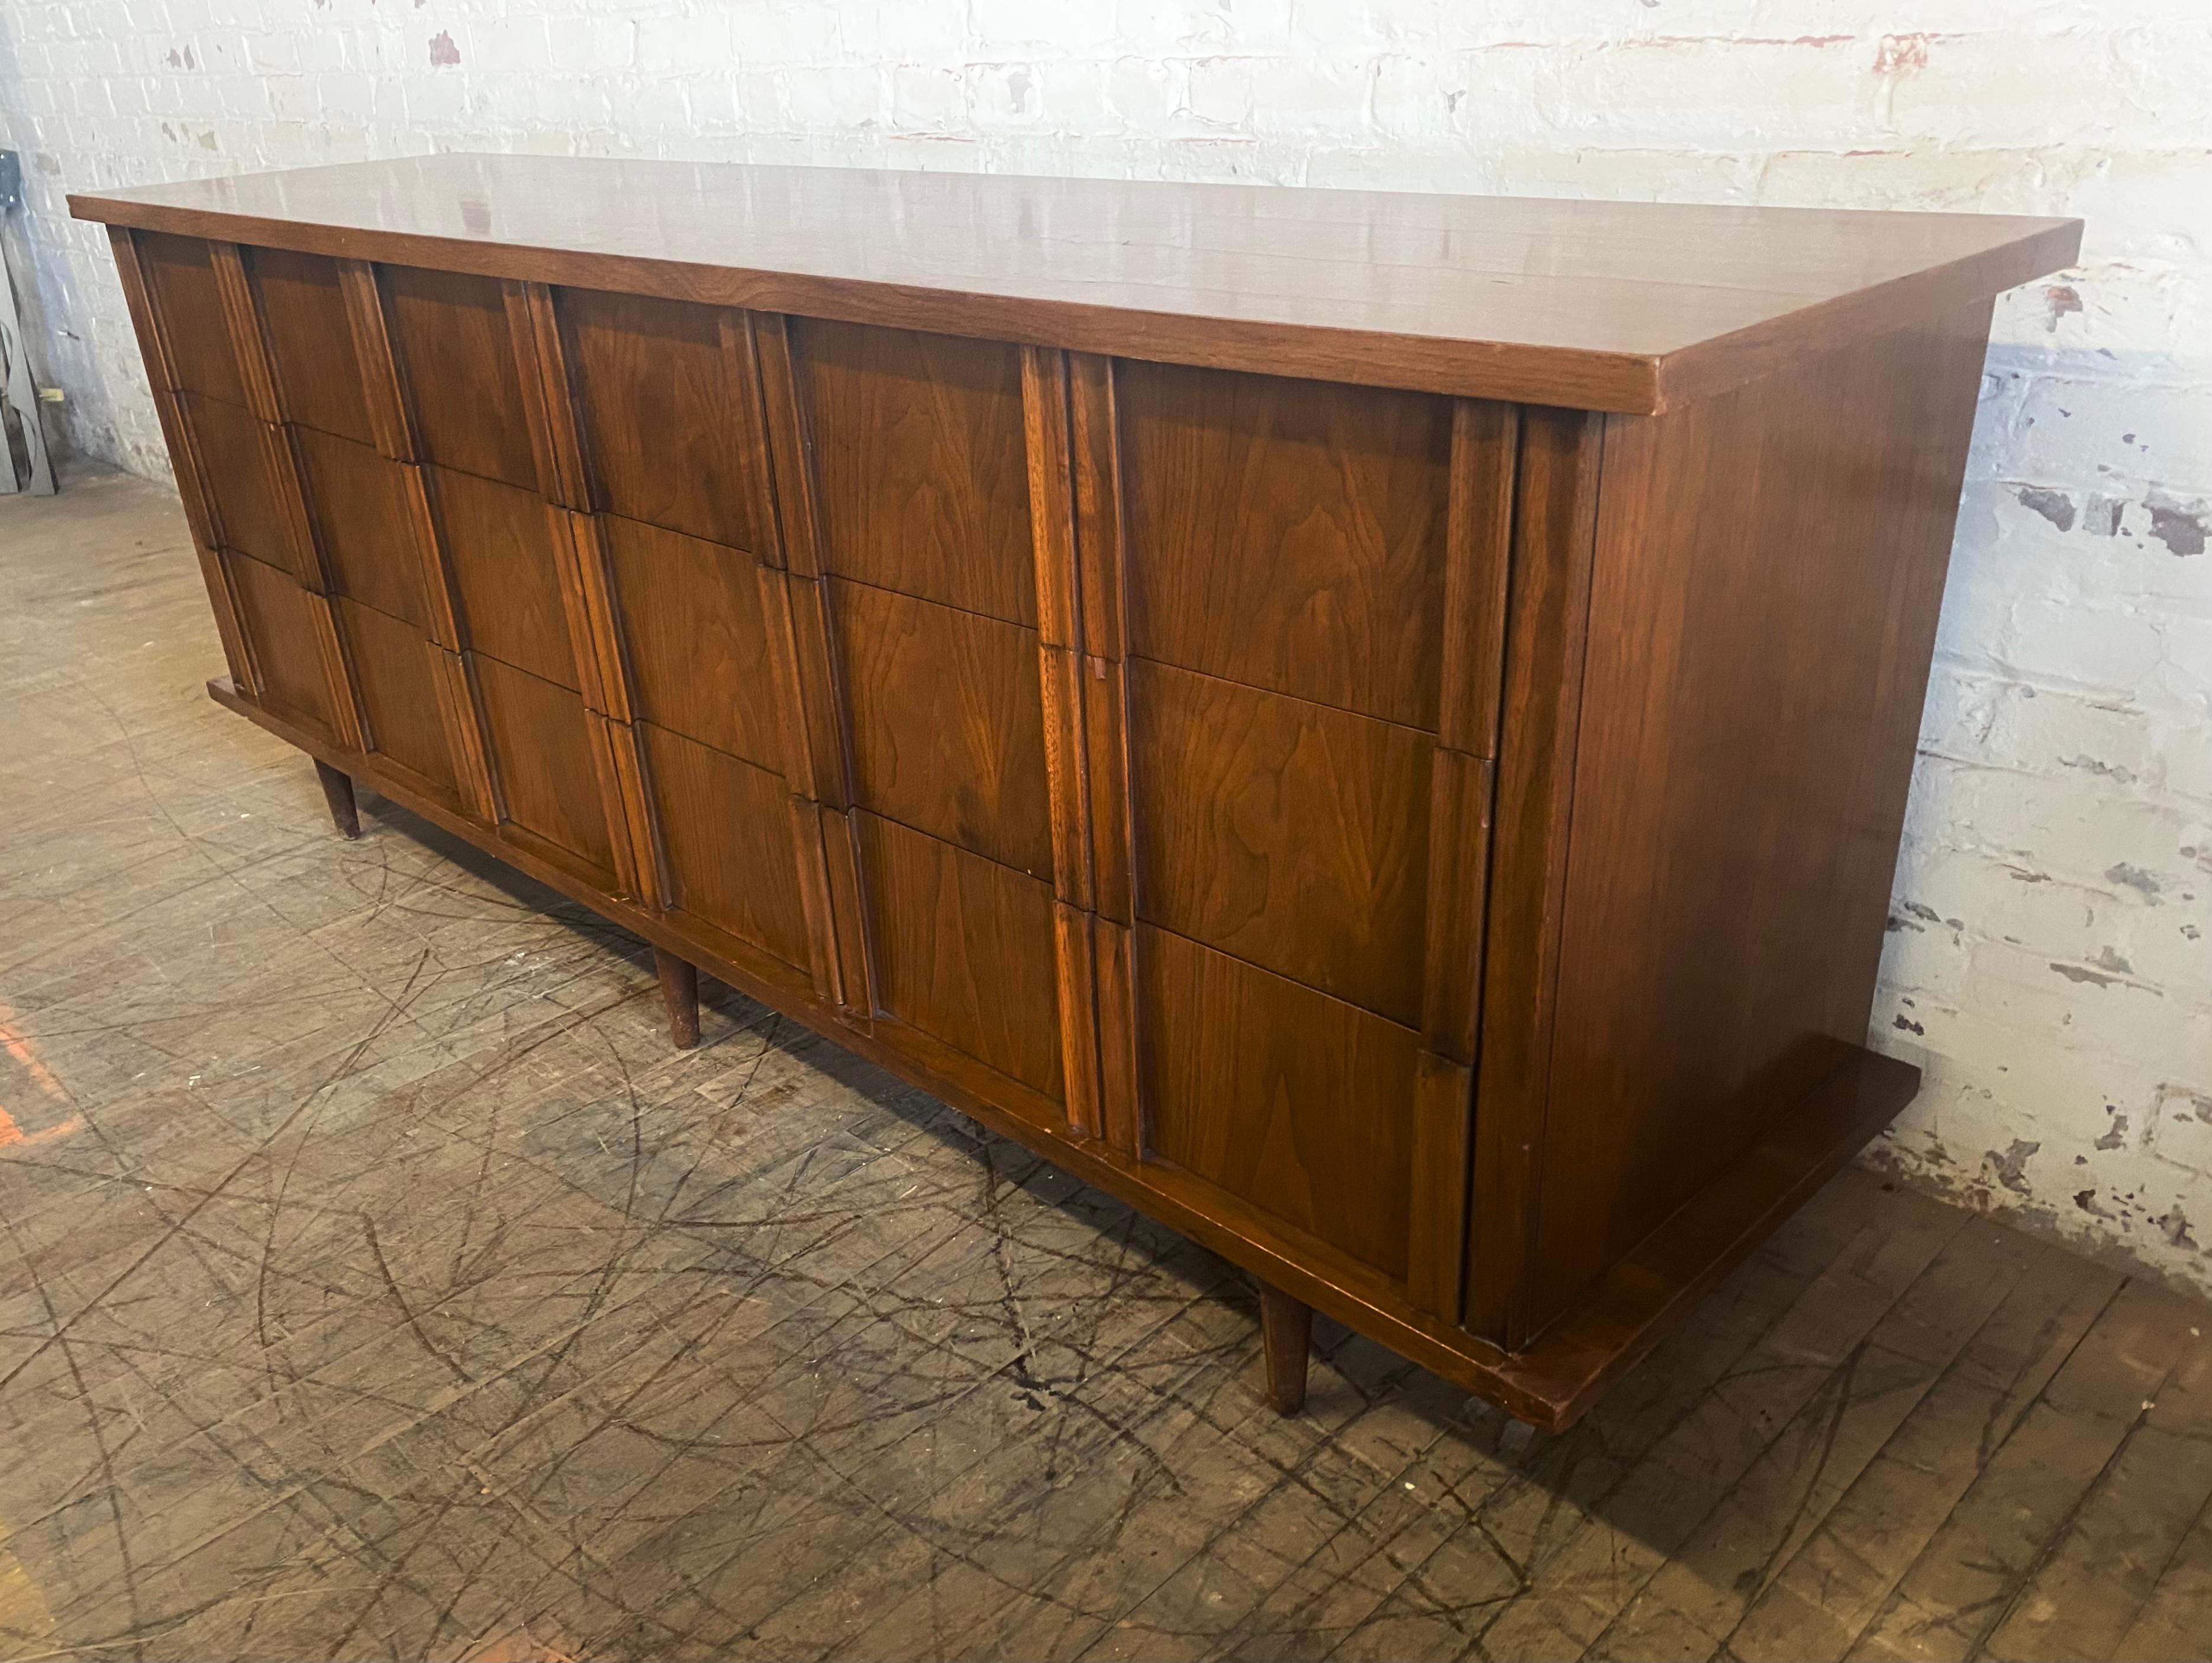 Modernist walnut 9 drawer dresser by American of Martinsville. Great design. Superior quality and construction, generous storage, wonderful figured walnut, book-matched grain. Minor repair to lower front corner (see photo). Hand delivery avail to